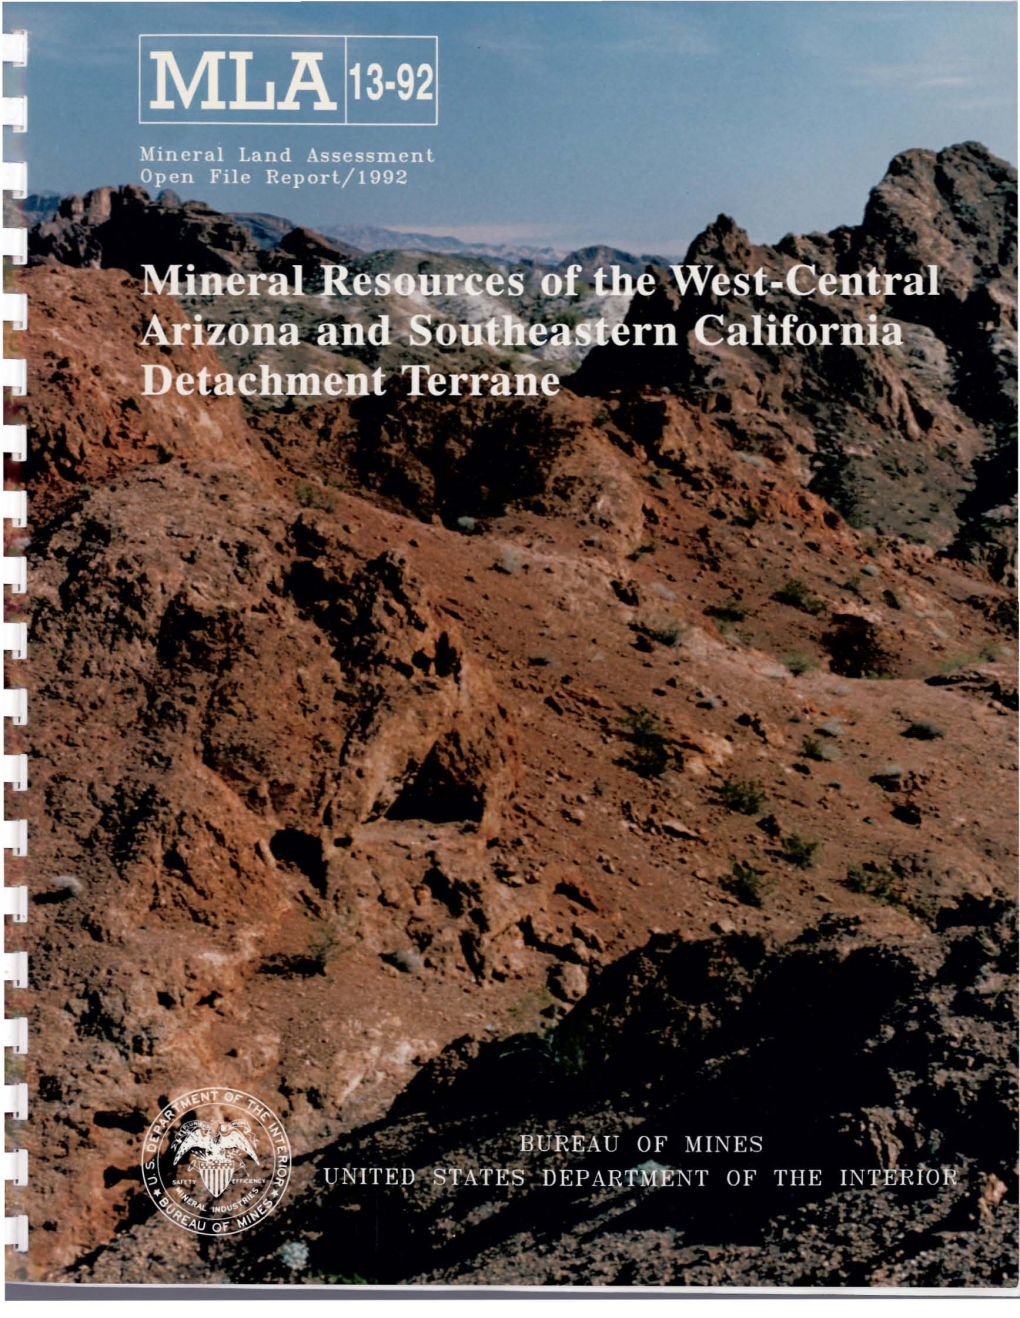 Mineral Resources of the West-Central Arizona and Southeastern California Detachmentterrane